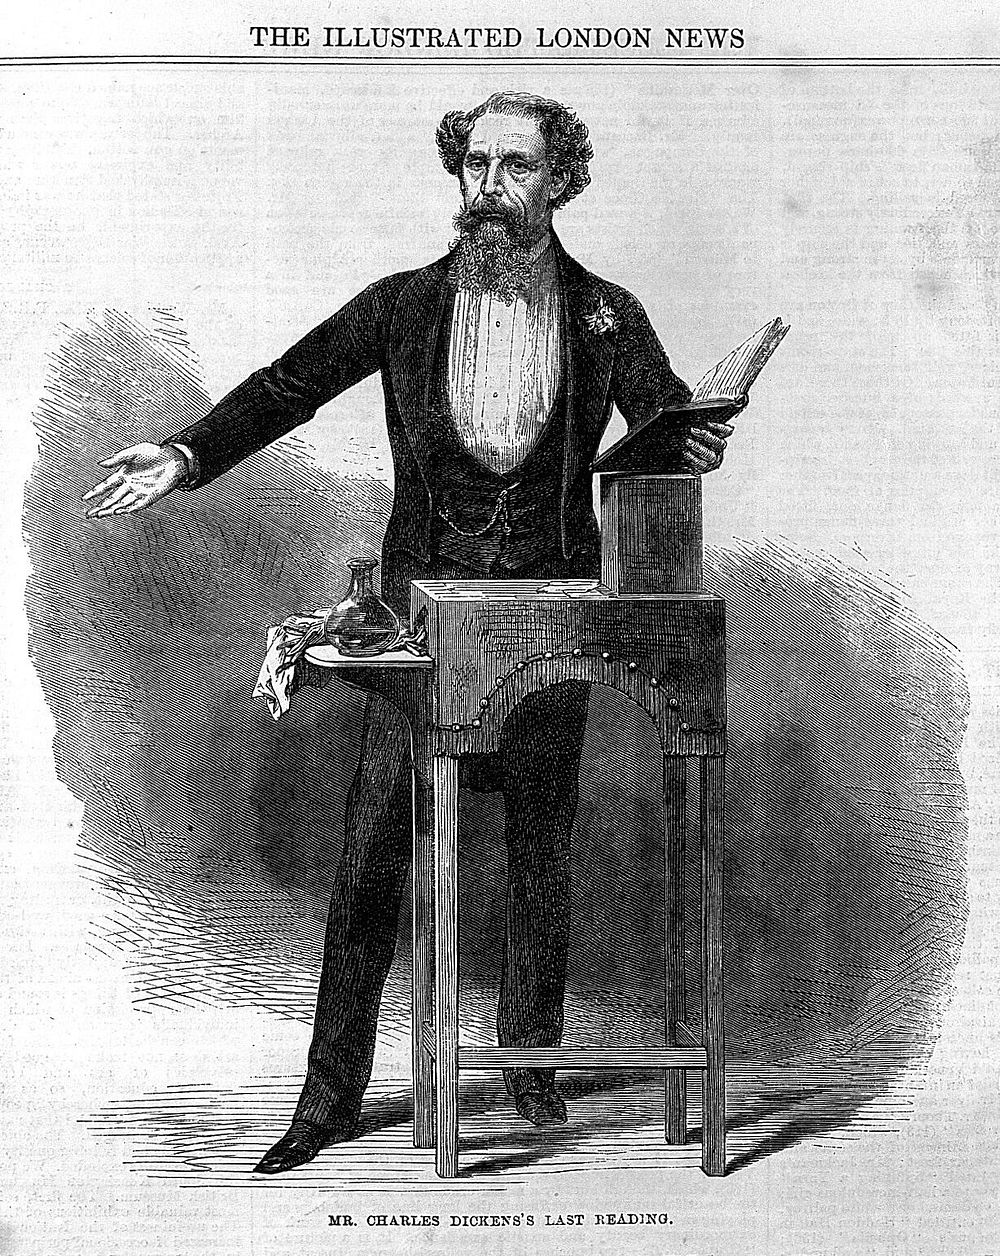 Dickens giving the last reading of his Works.